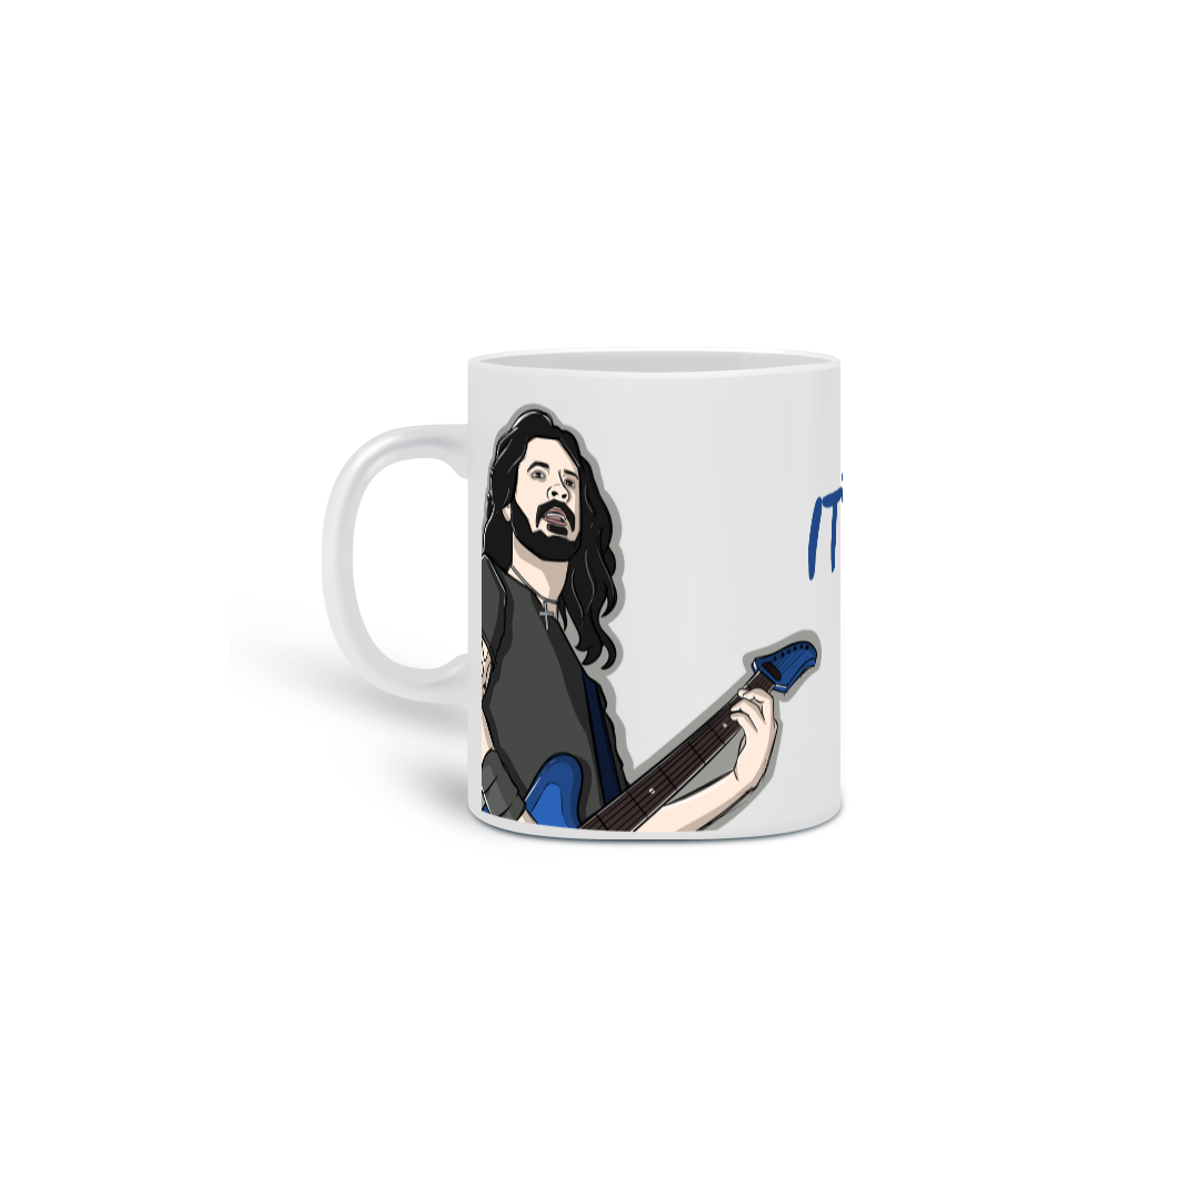 Nome do produto: Caneca Foo Fighters - Times Like these